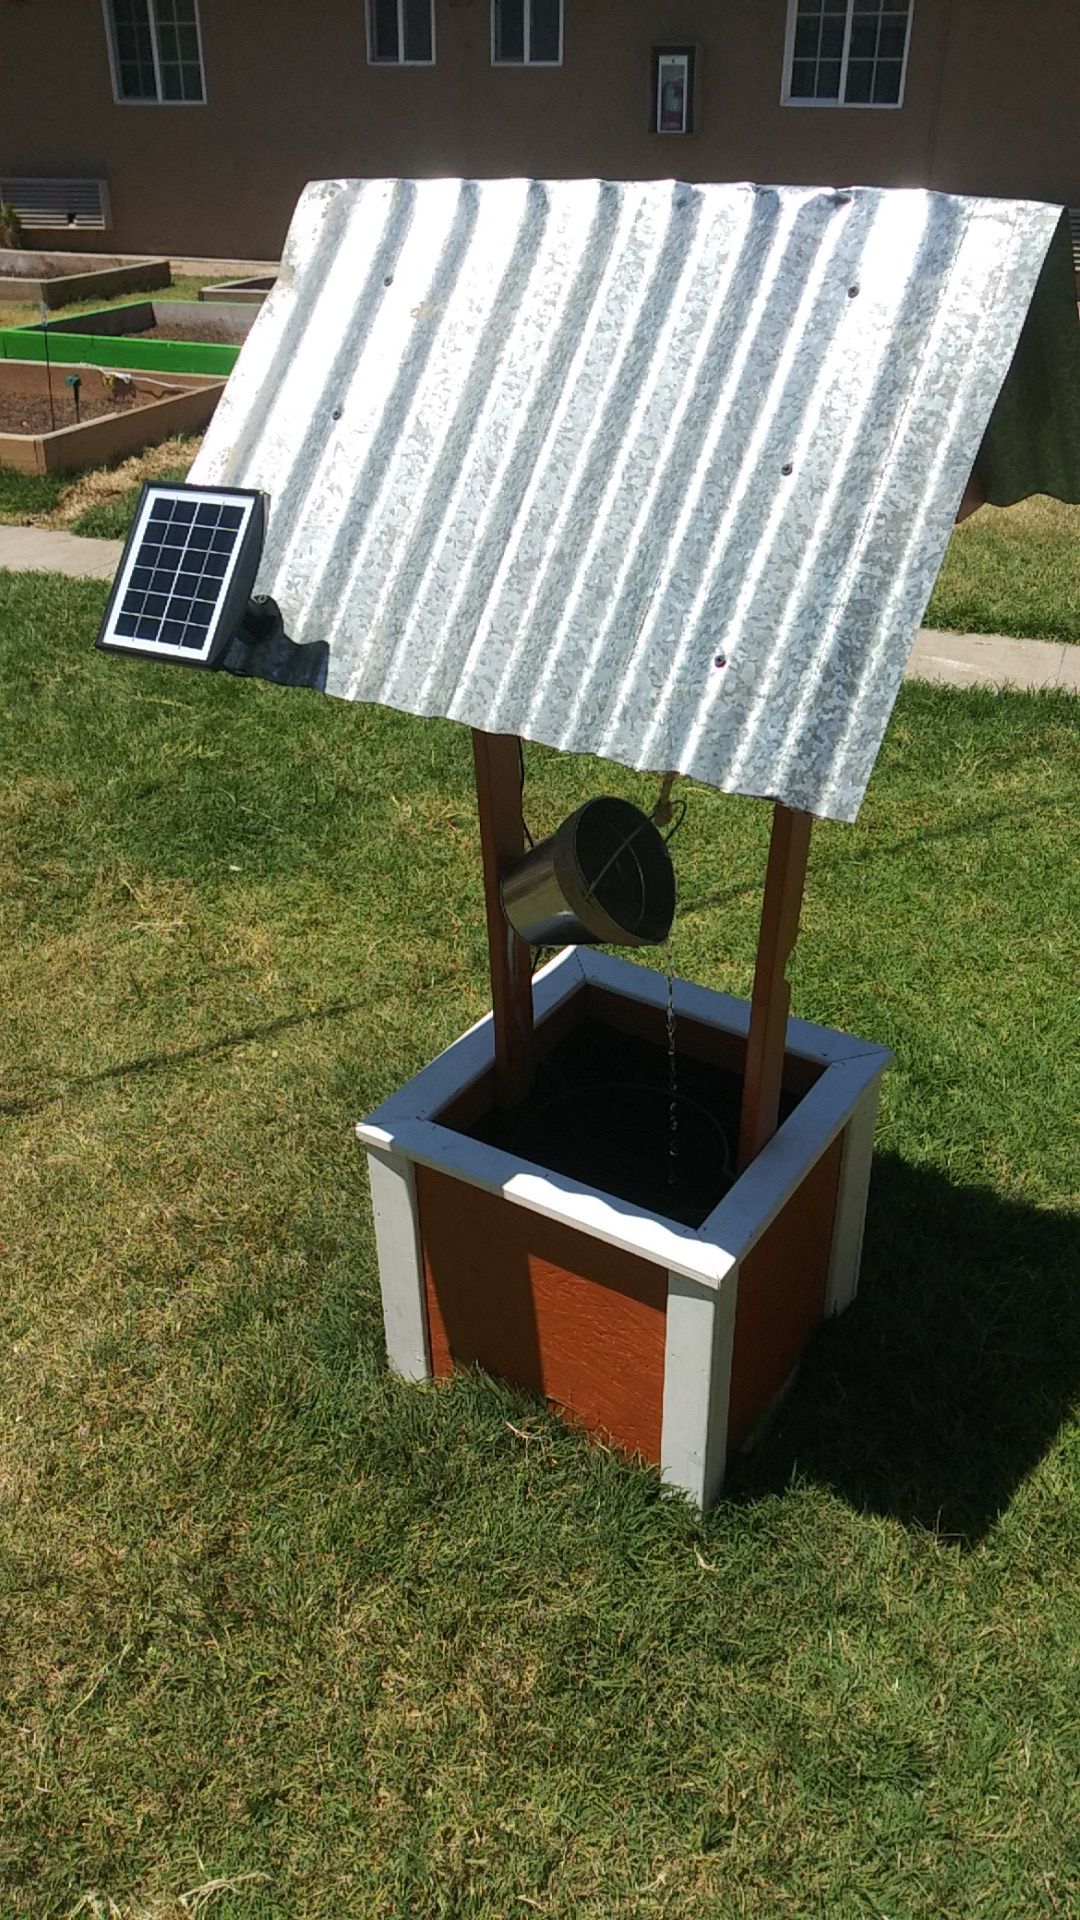 Solar well water fountain